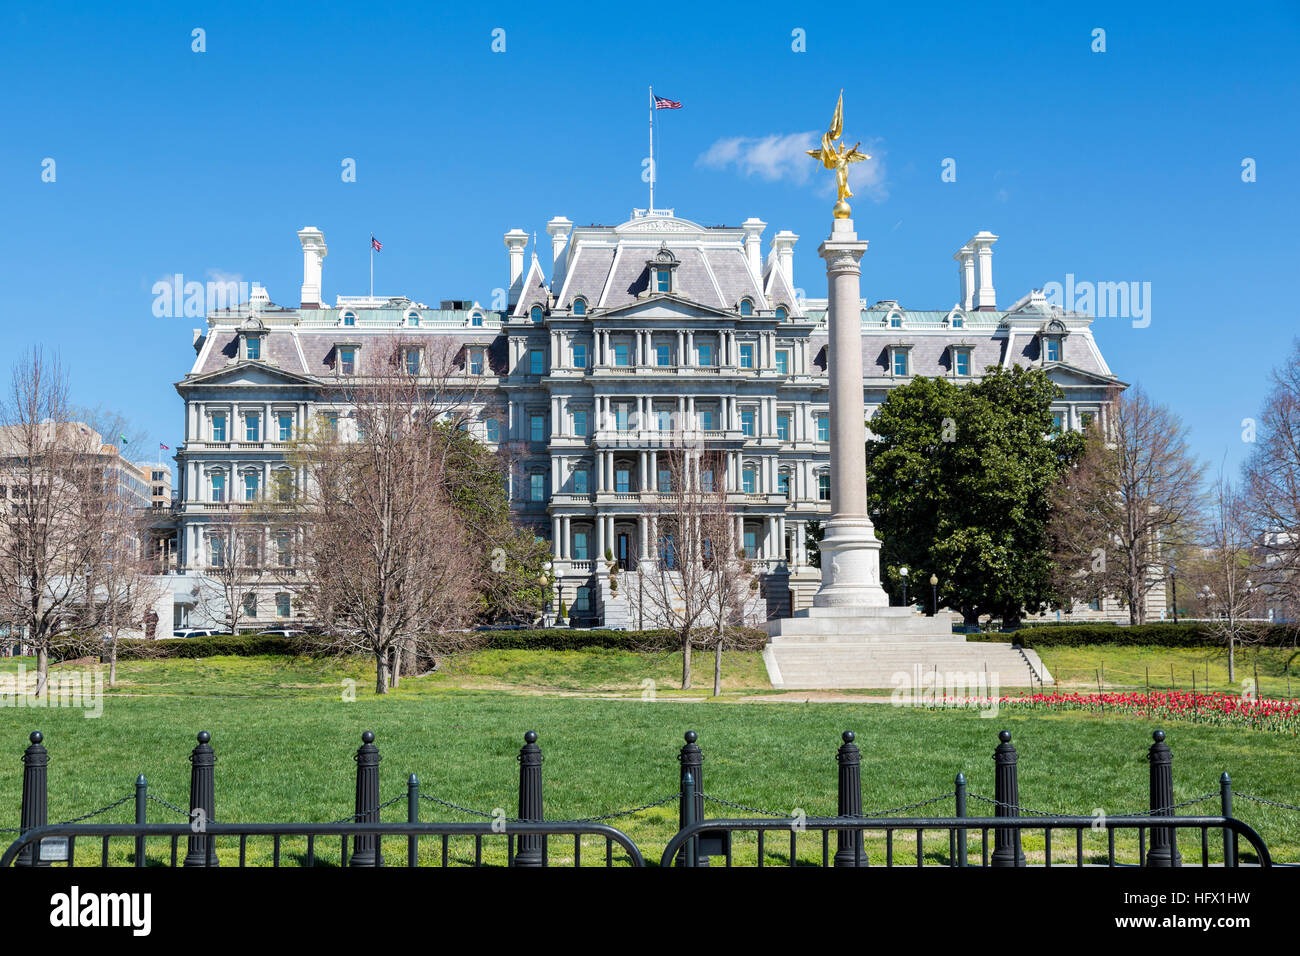 Eisenhower Executive Office Building,formerly known as the Old Executive Office Building,  earlier as the State, War, and Navy Building, Washington DC Stock Photo